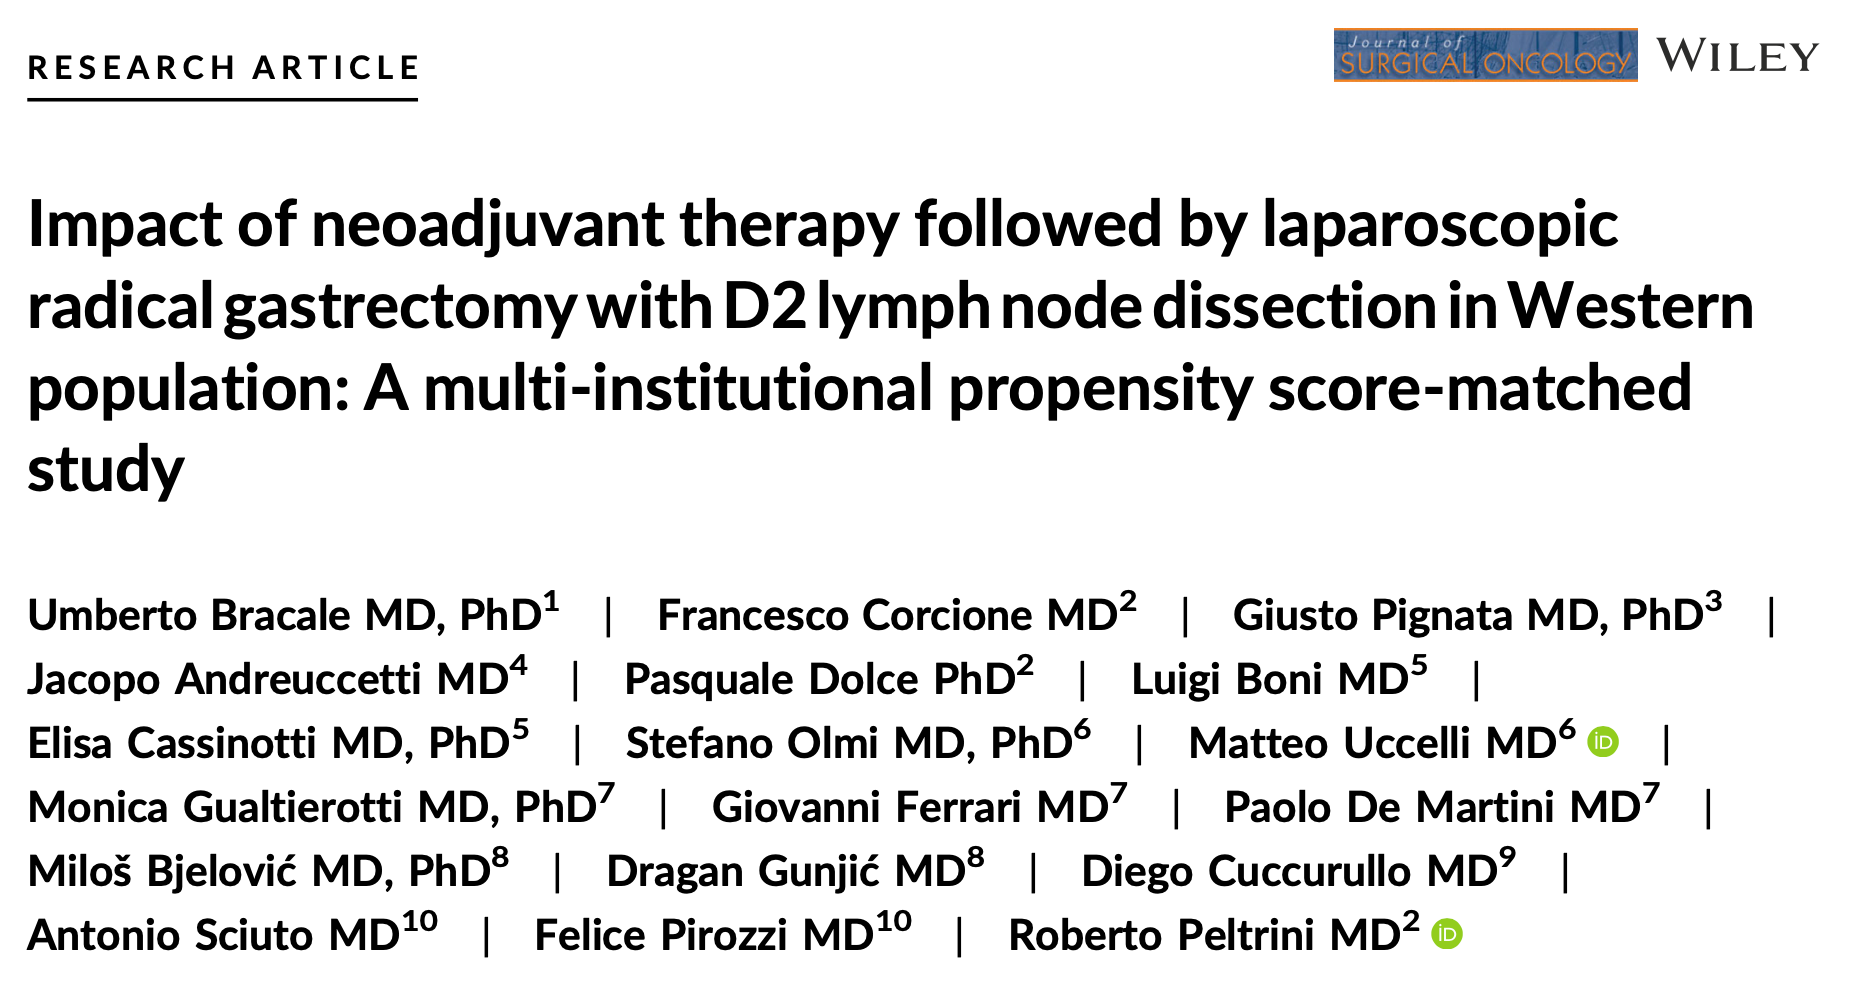 Neoadjuvant therapy followed by laparoscopic radical gastrectomy for cancer